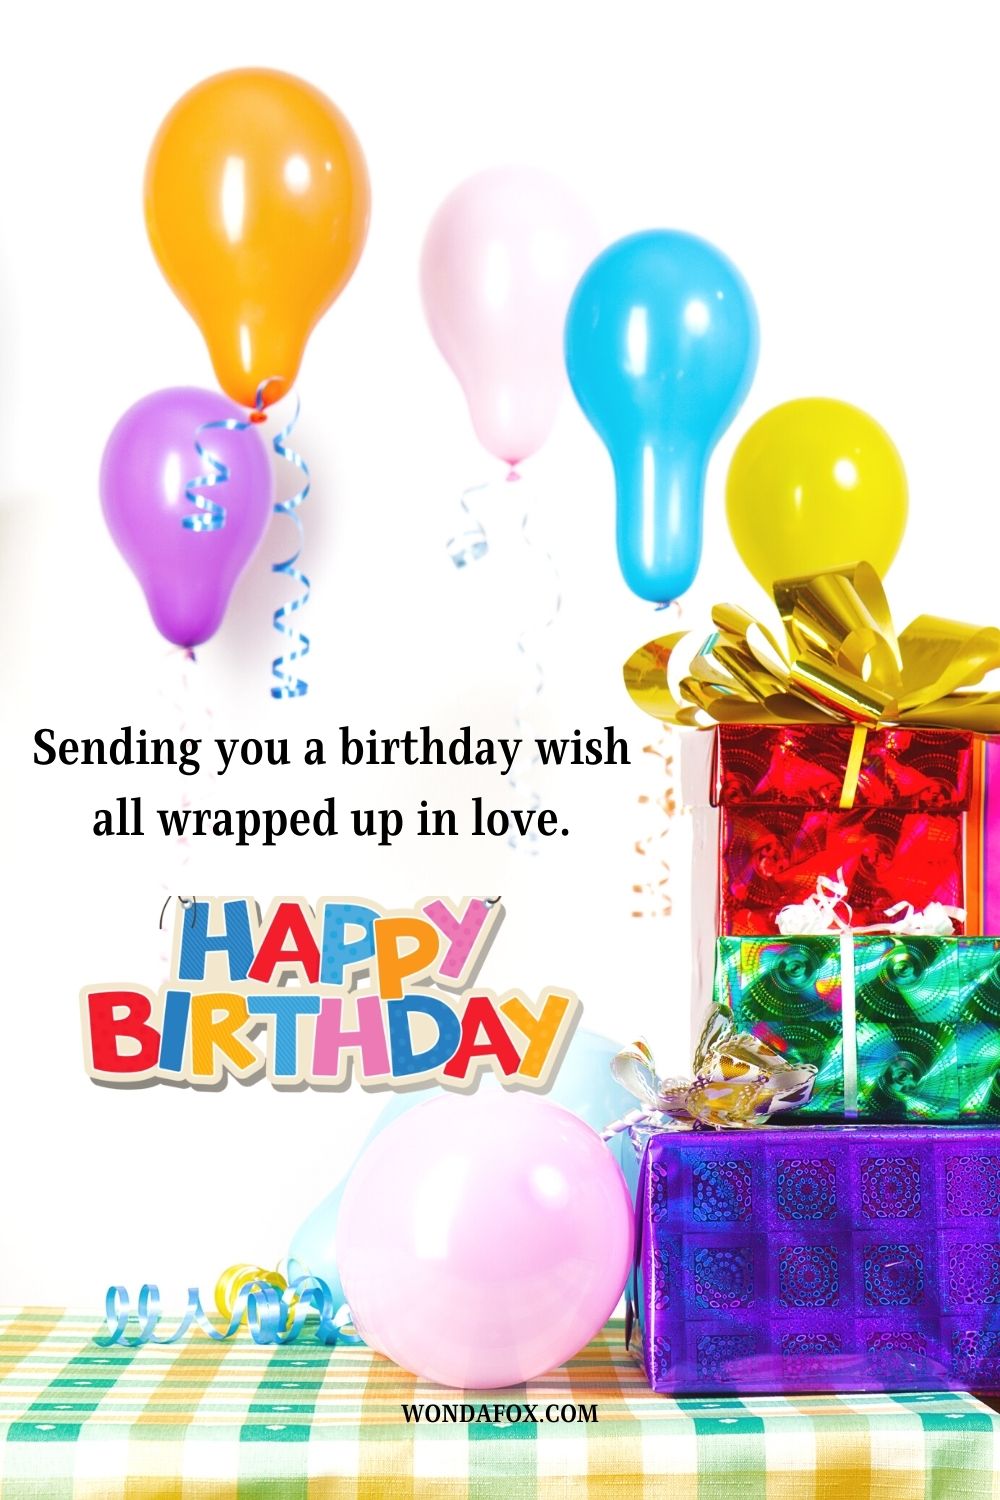 Sending you a birthday wish all wrapped up in love. Happy Birthday Sis.